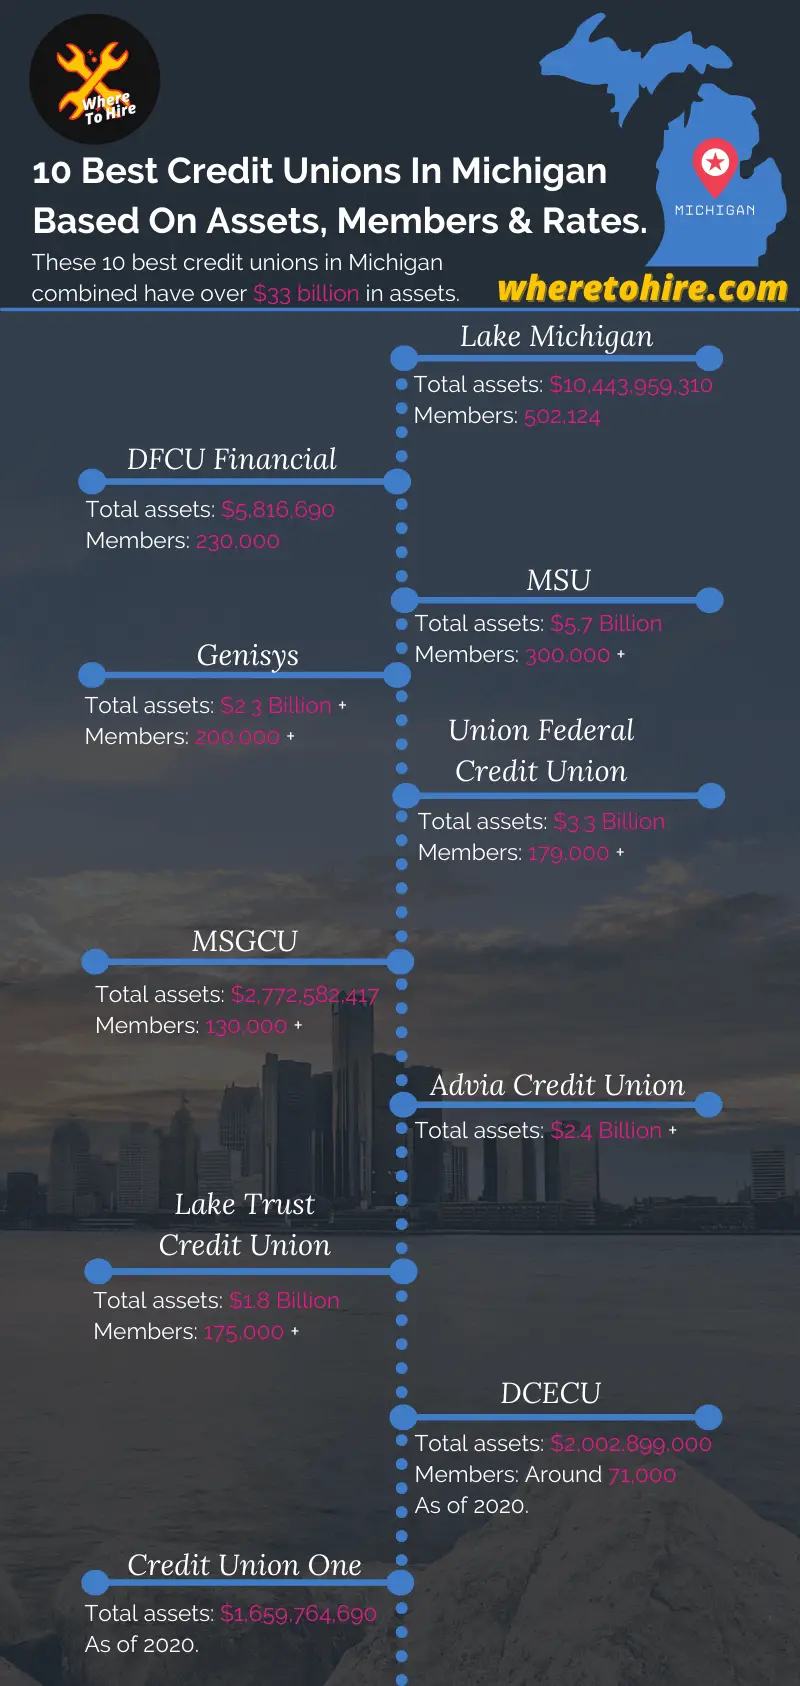 What Are The Best Credit Unions In Michigan?